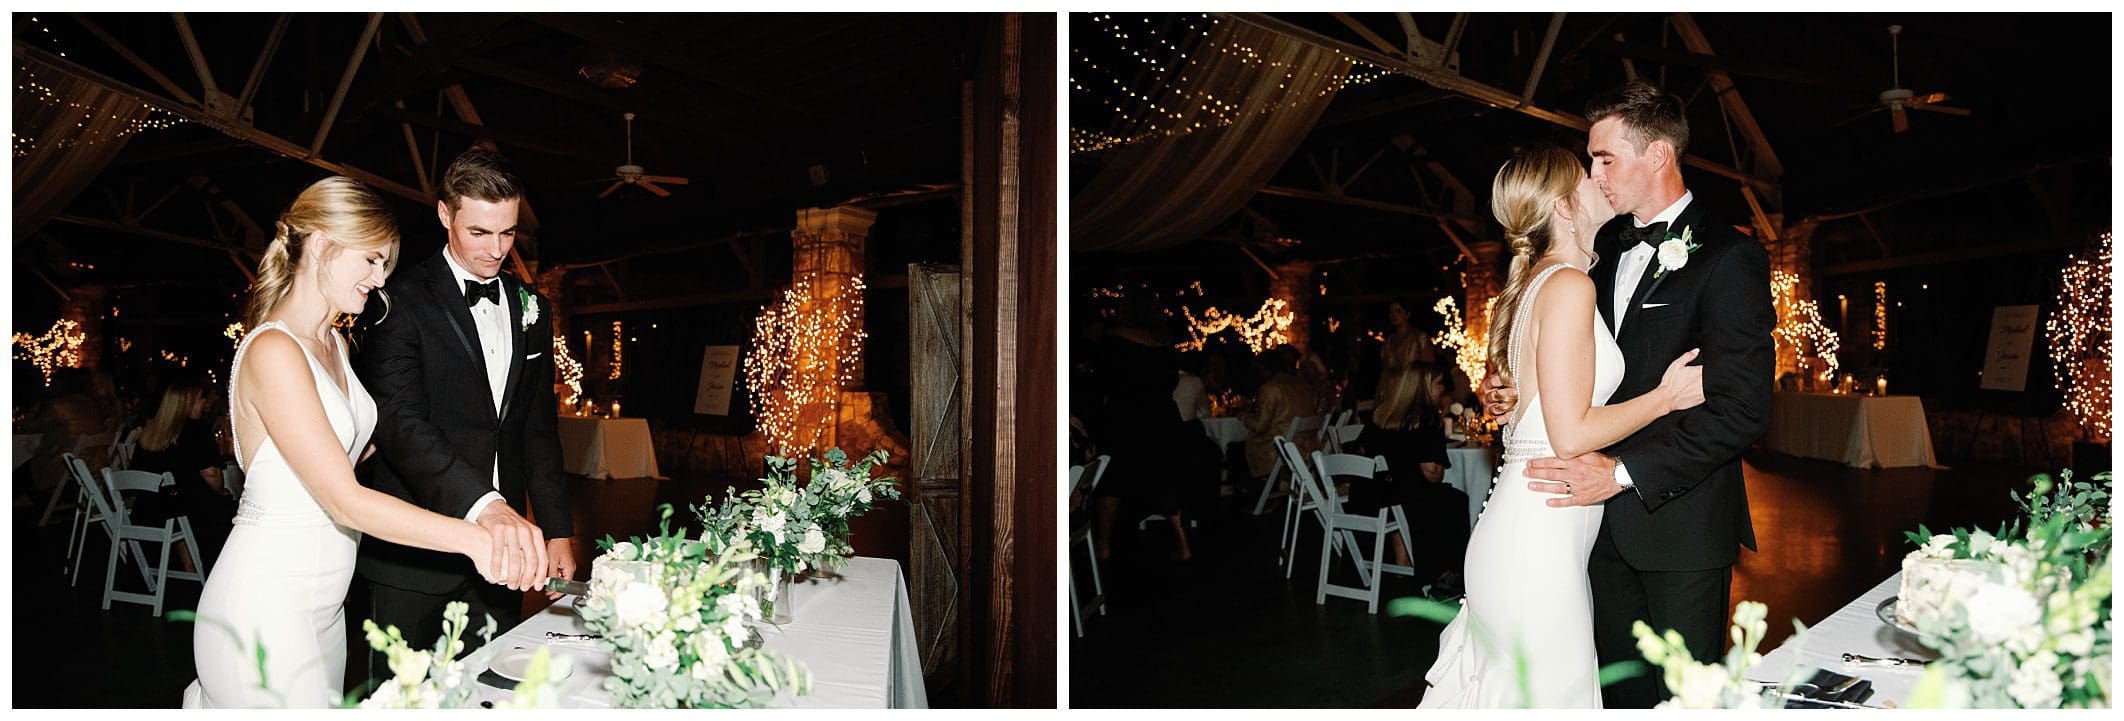 Two pictures of a fall wedding at Crest Center, featuring the bride and groom cutting their wedding cake.